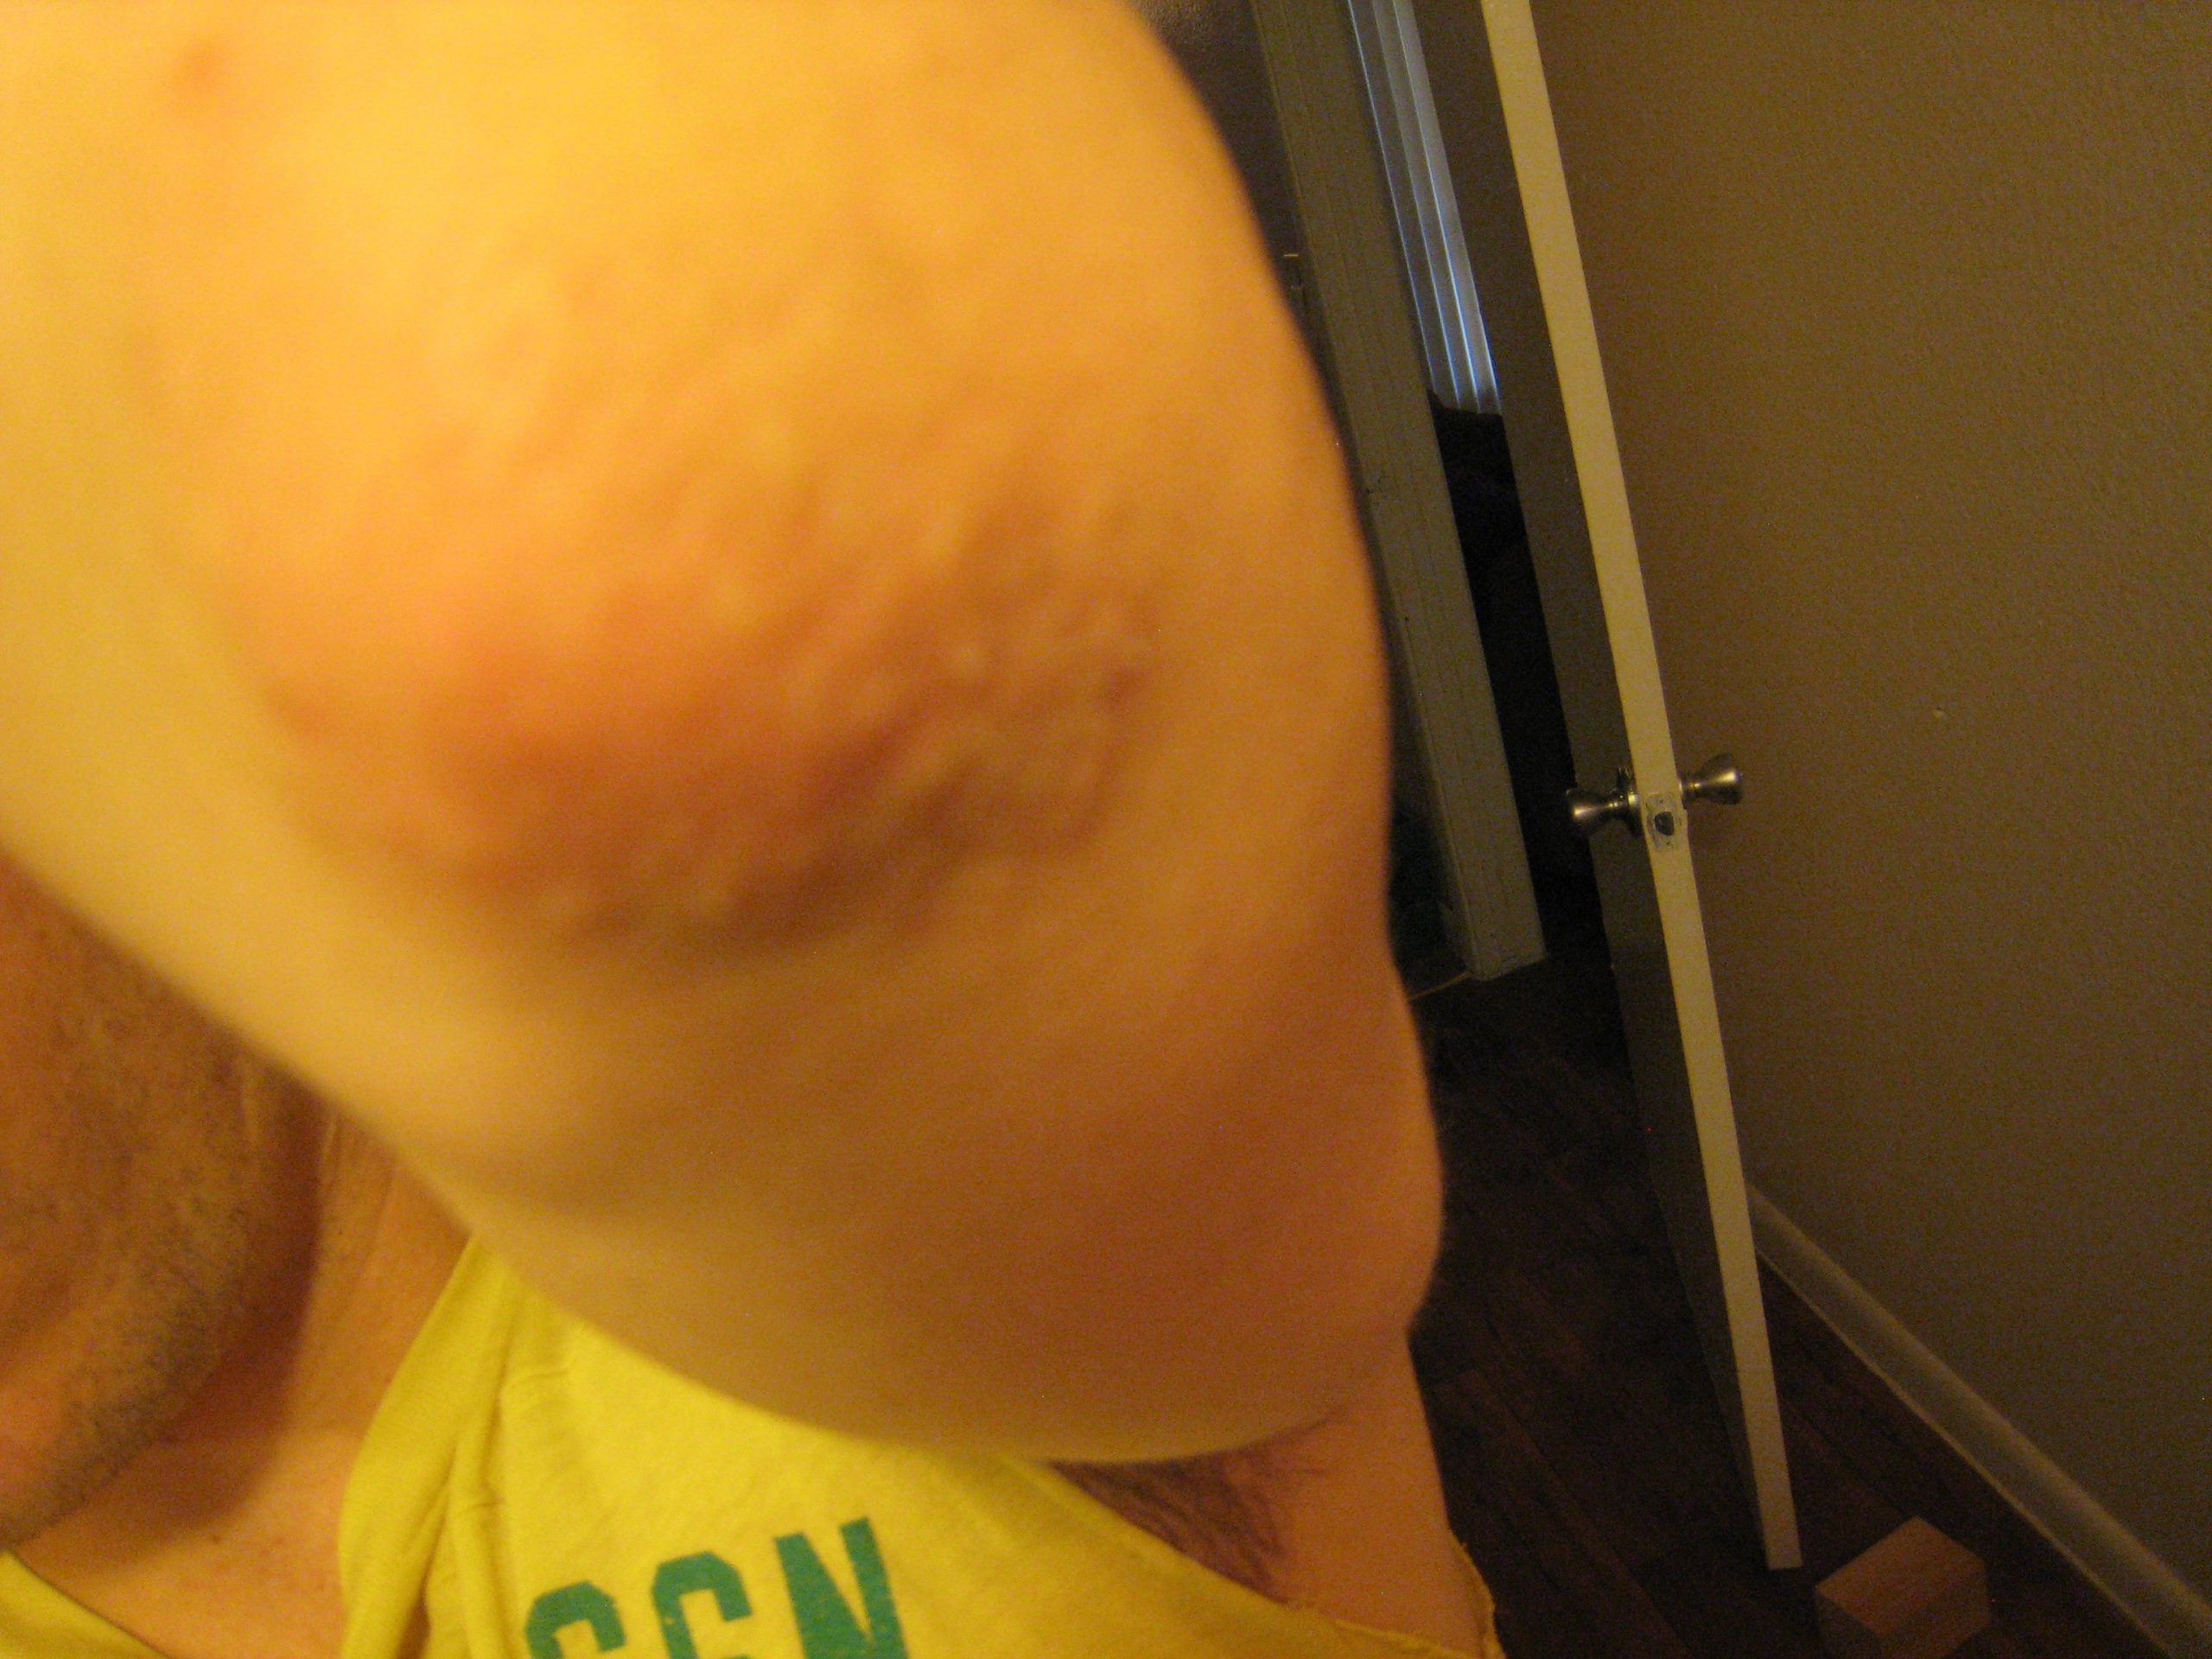 My left elbow itches and there are small skin colored ...